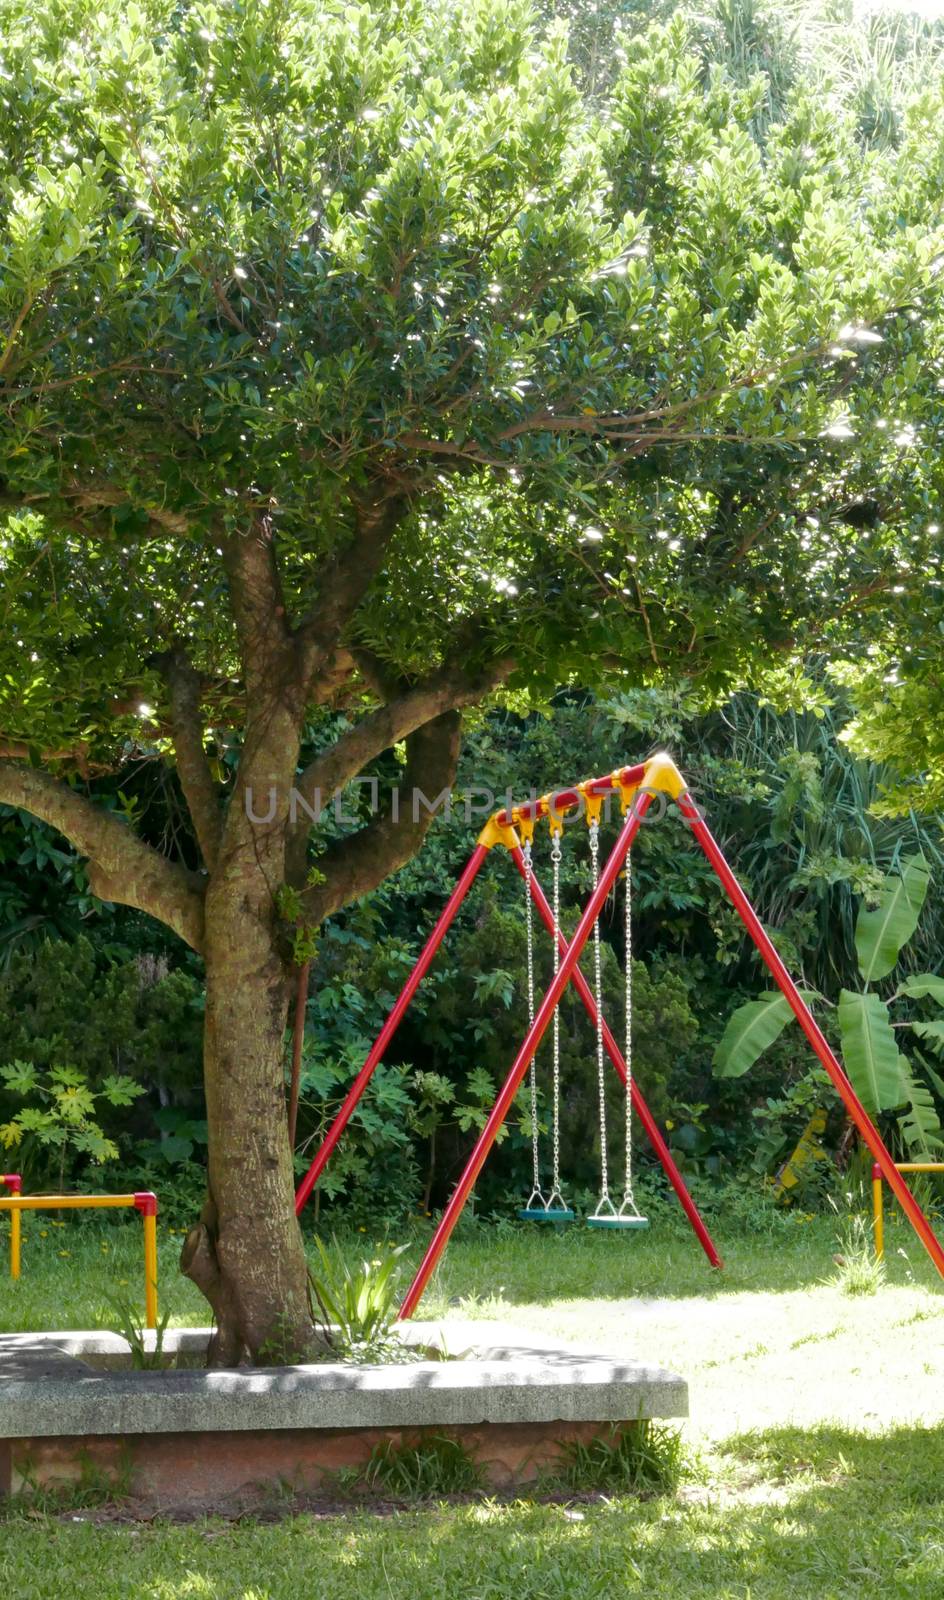 Colourful park swing on the grass